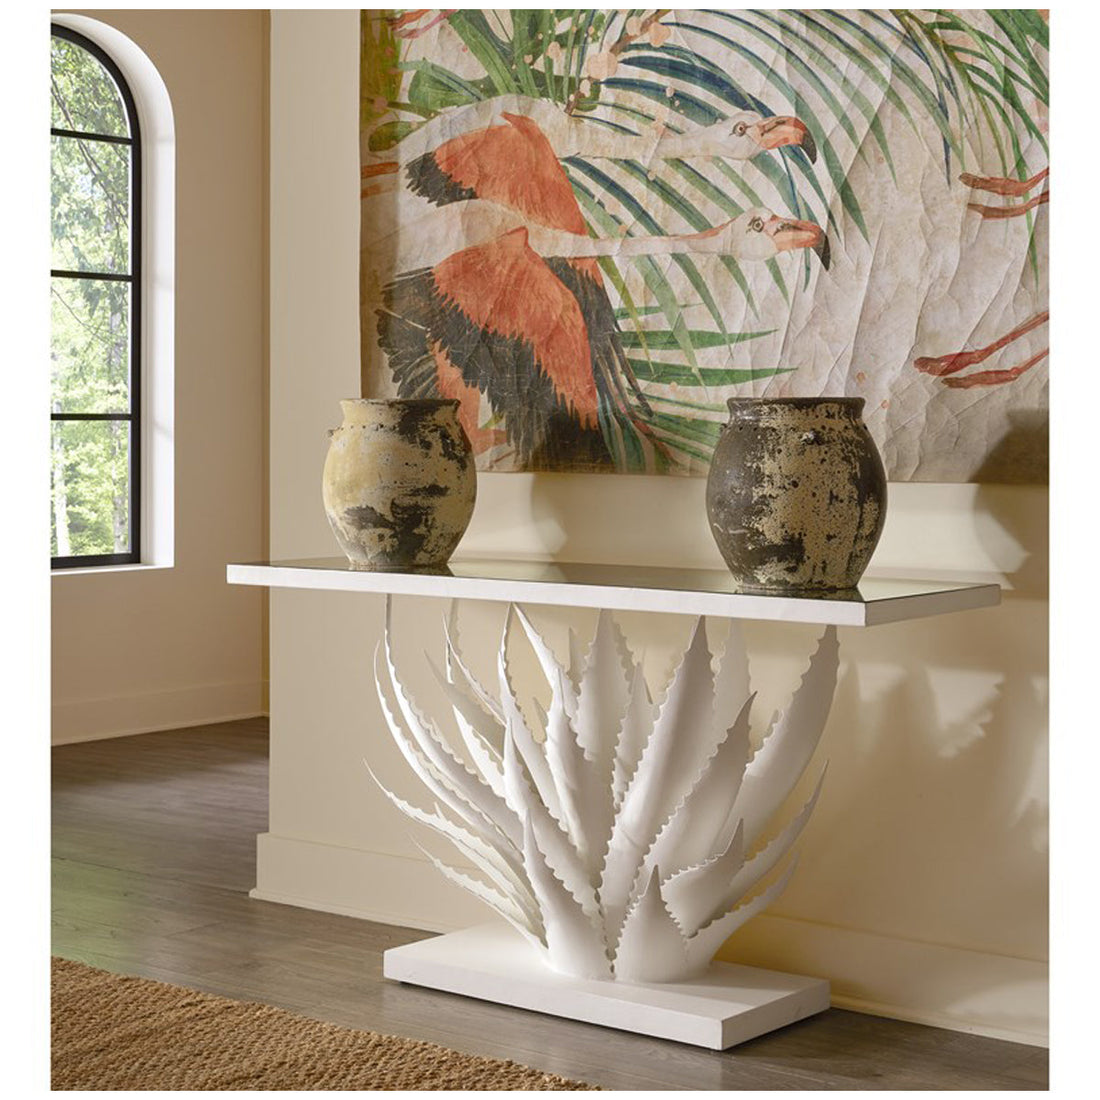 Currey and Company Agave White Console Table